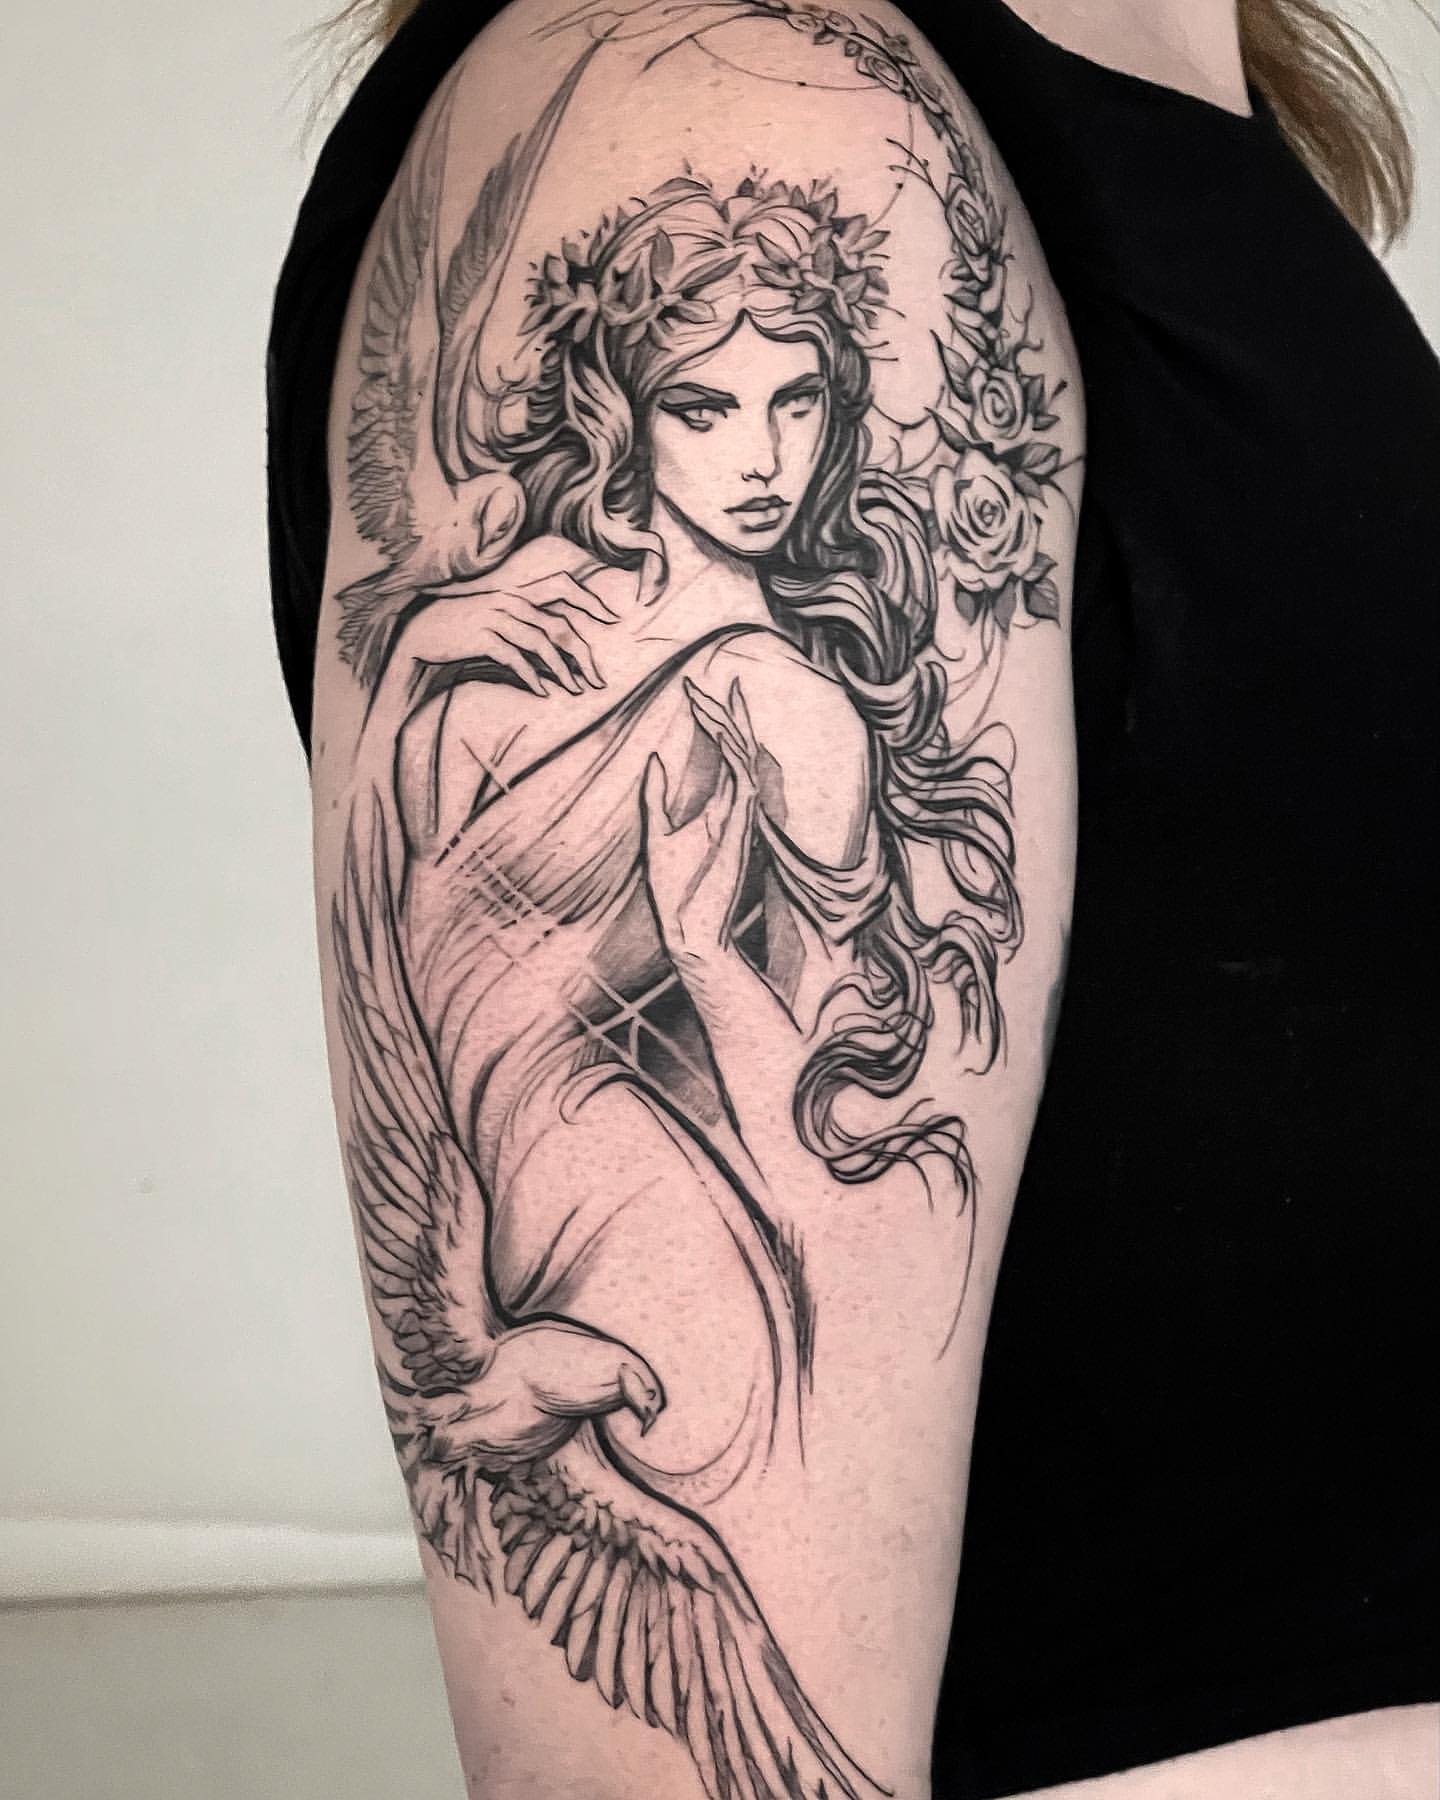 101 Best Goddess Tattoo Ideas You Have To See To Believe!